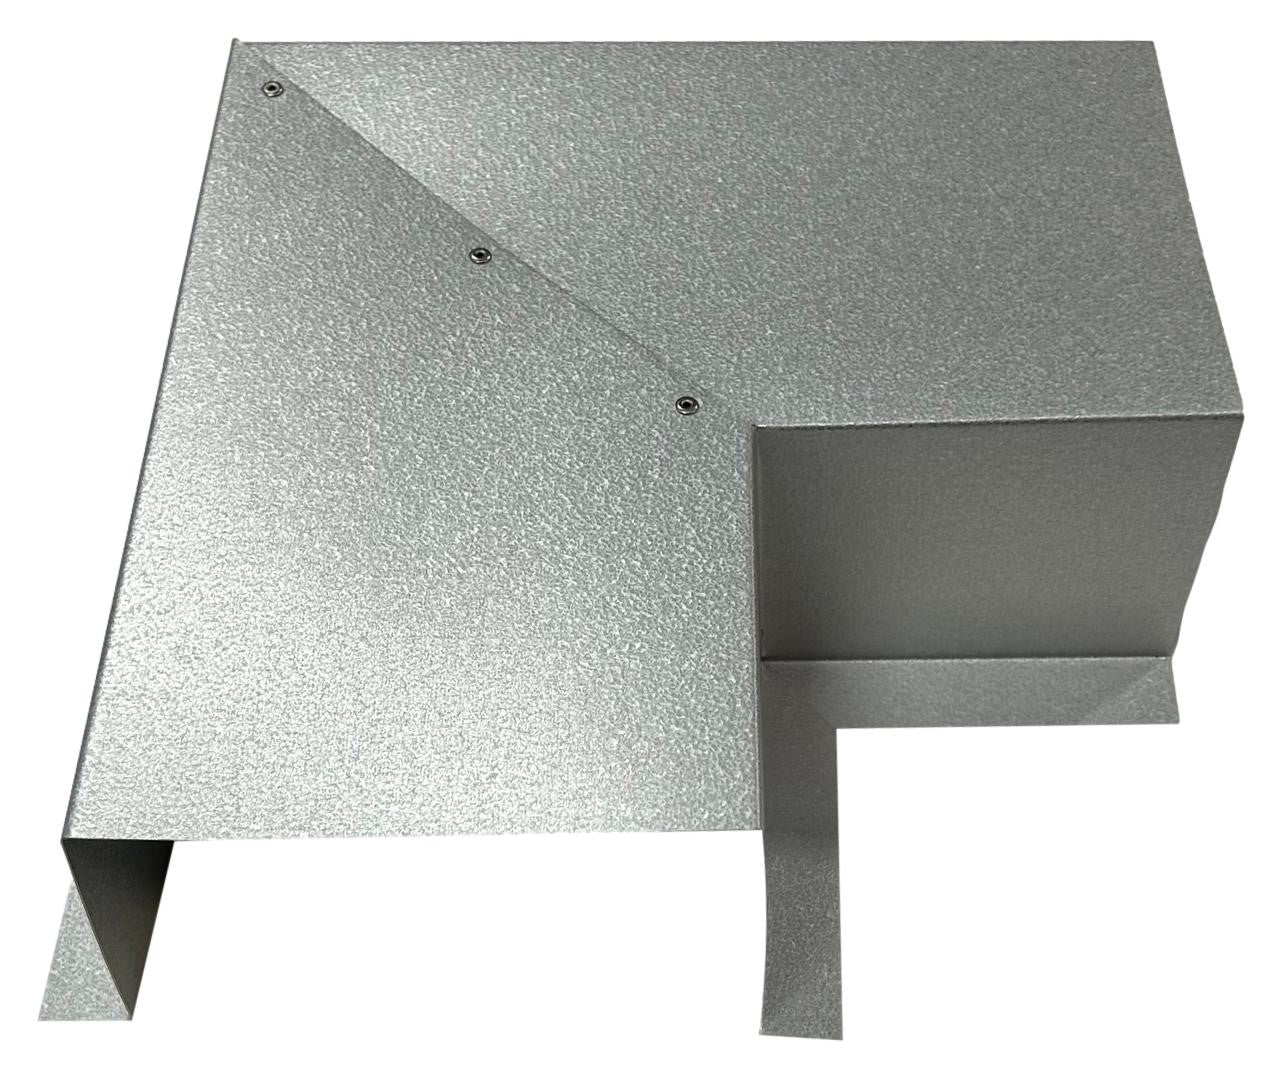 A metallic, angular object featuring several flat, intersecting planes and reflective surfaces. The design includes bolts and right-angled folds, giving it a modern, geometric appearance. Crafted from Perma Cover Residential Series - Line Set Cover Side Turning Elbows - Premium Quality for HVAC line sets, it promises durability and easy installation in industrial settings.